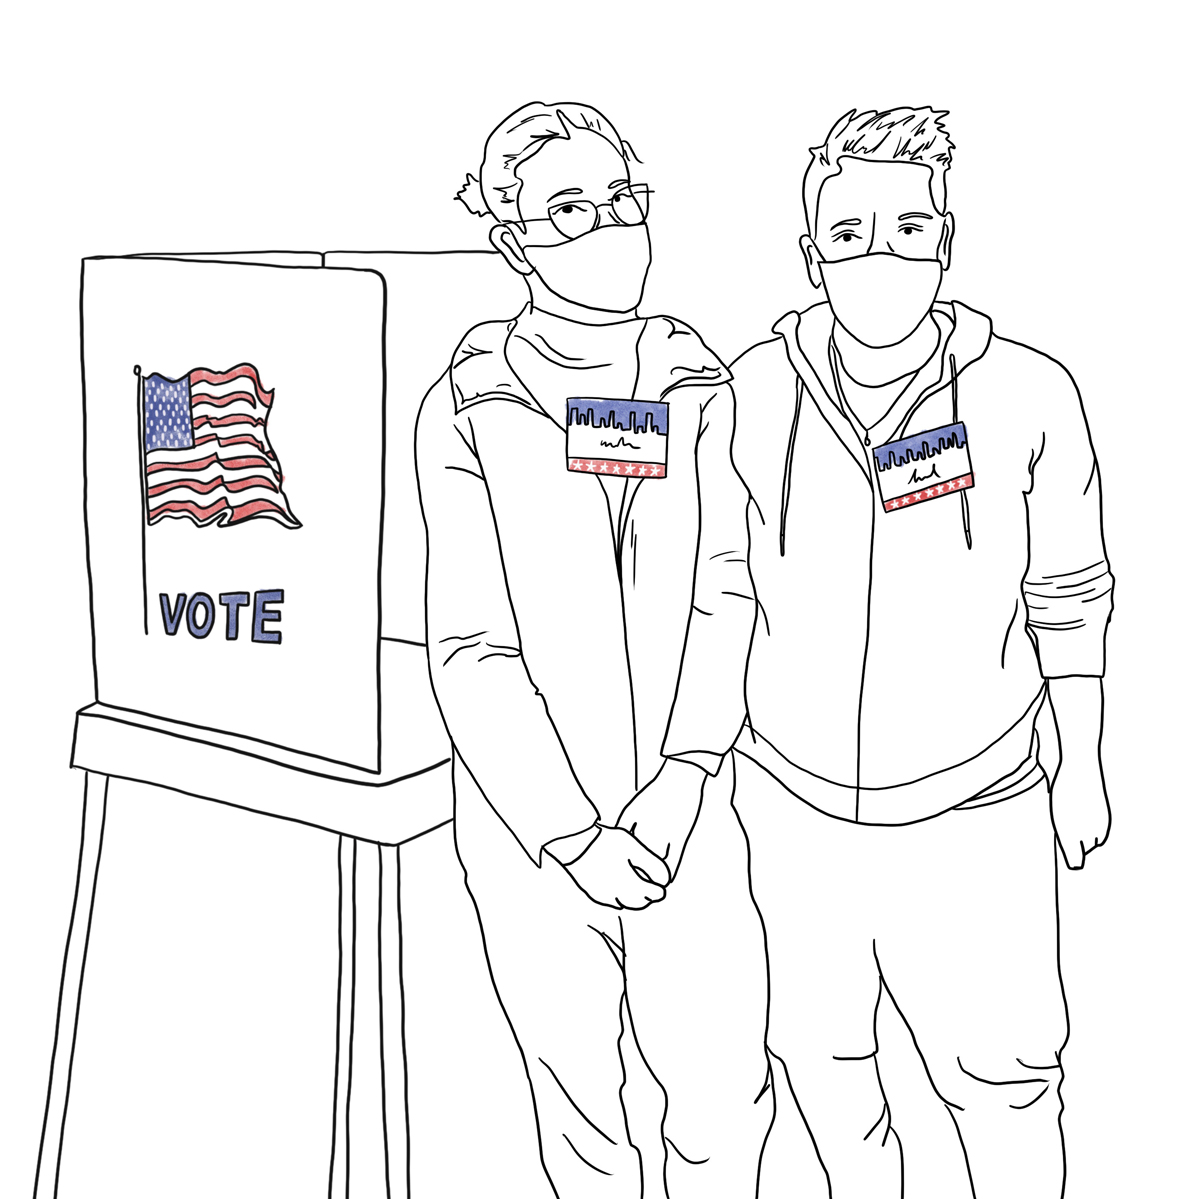 An illustrative sketch of two voting poll workers